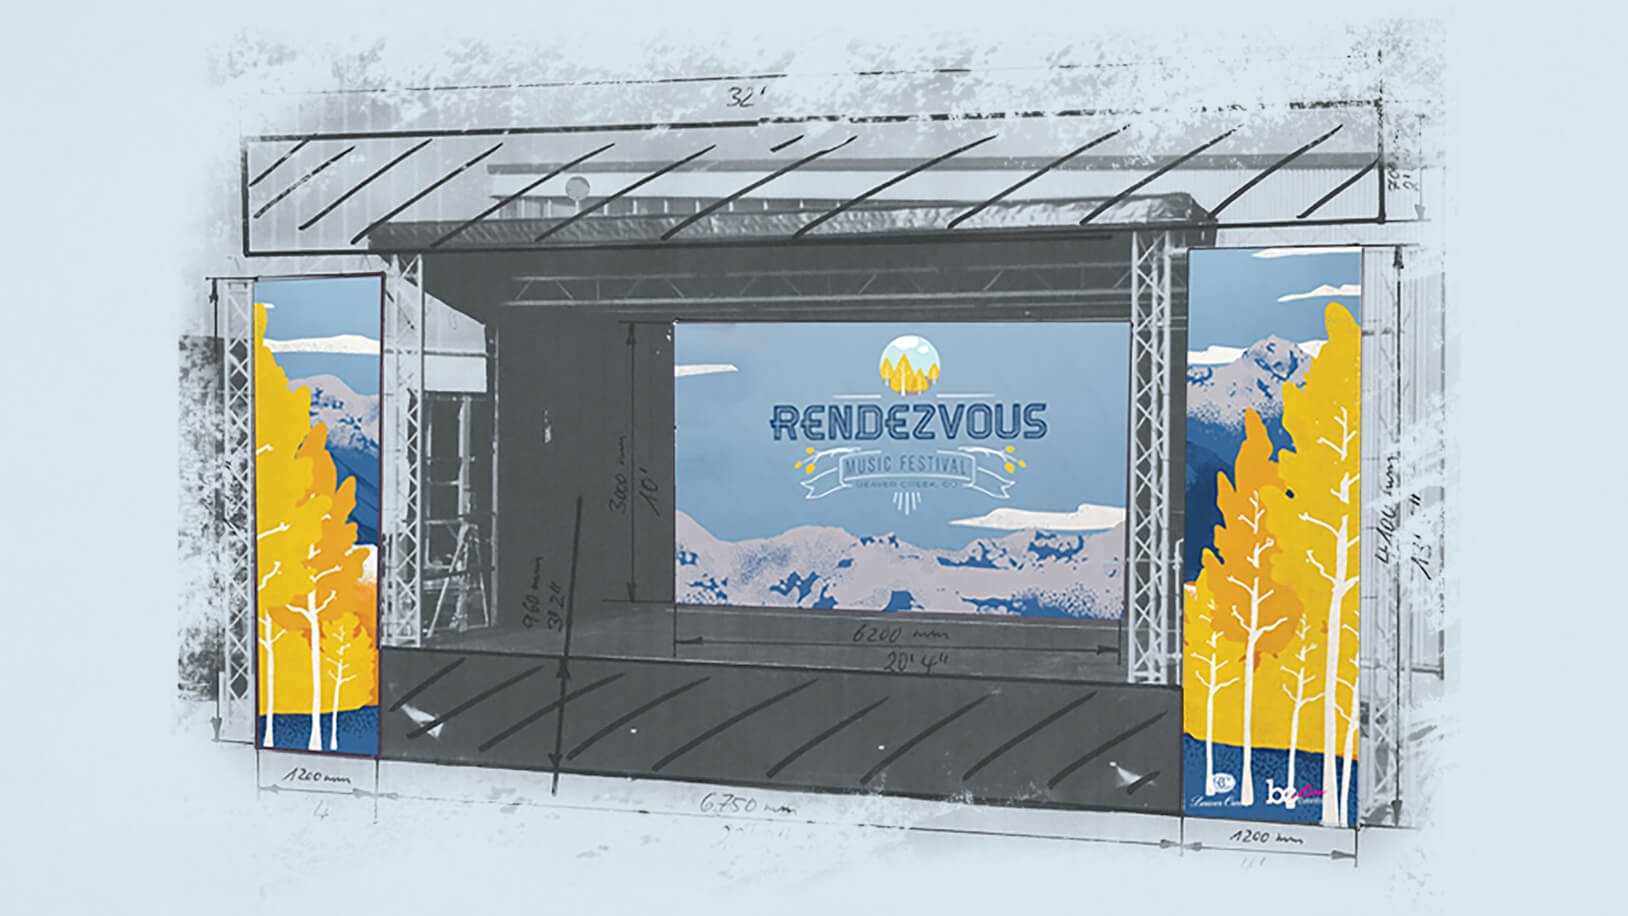 Stage backdrop and scrims design featuring logo and key art illustrations for Rendezvous Music Festival in Beaver Creek, Colorado